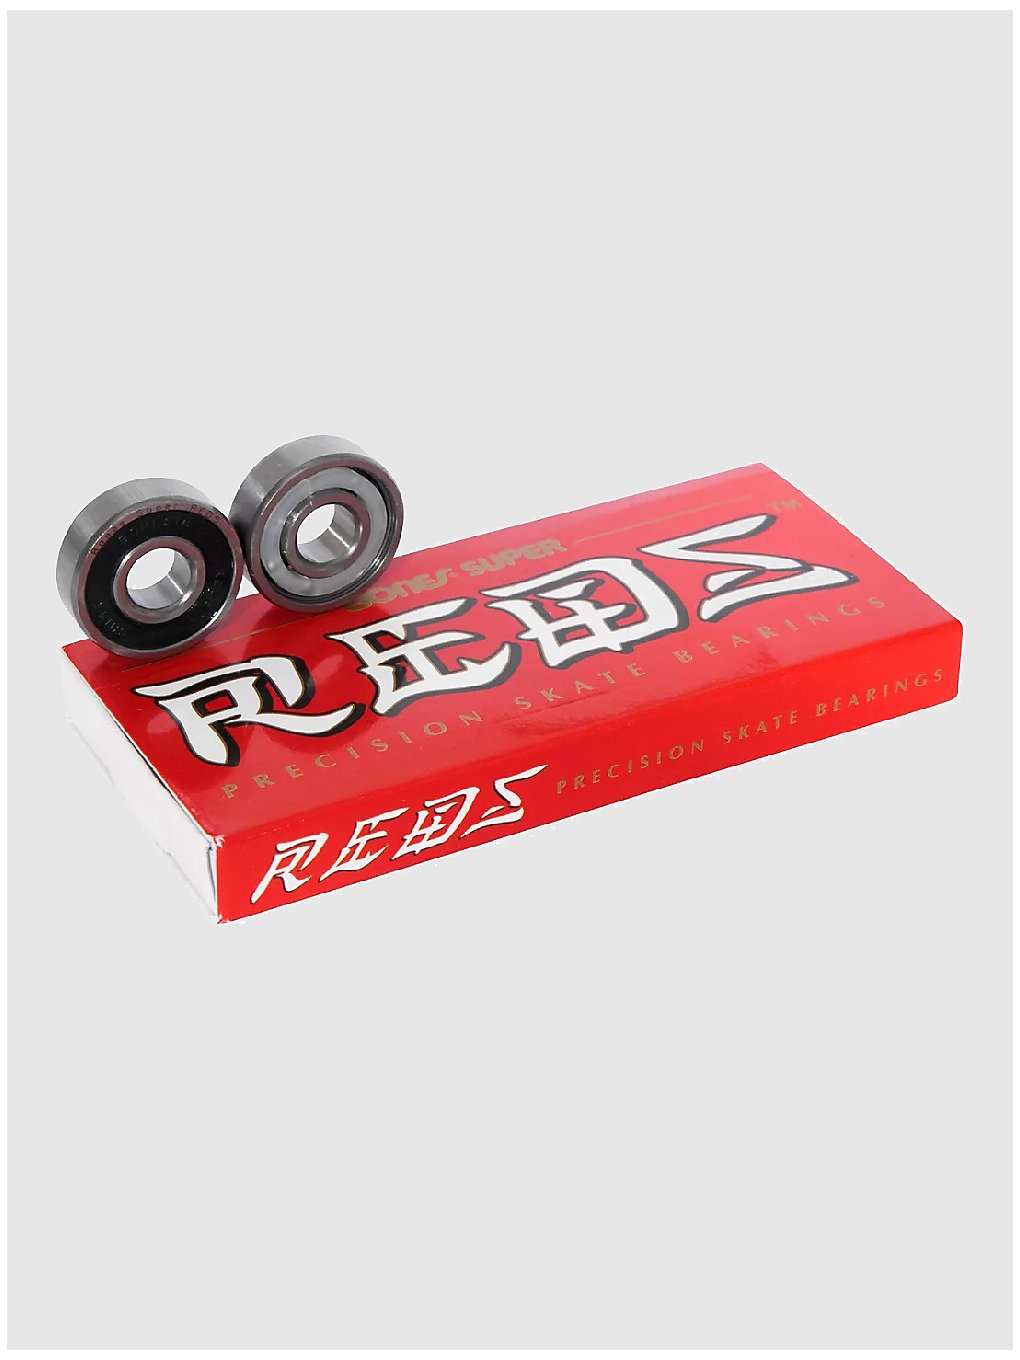 Bones Bearings Super Reds Roulements rouge